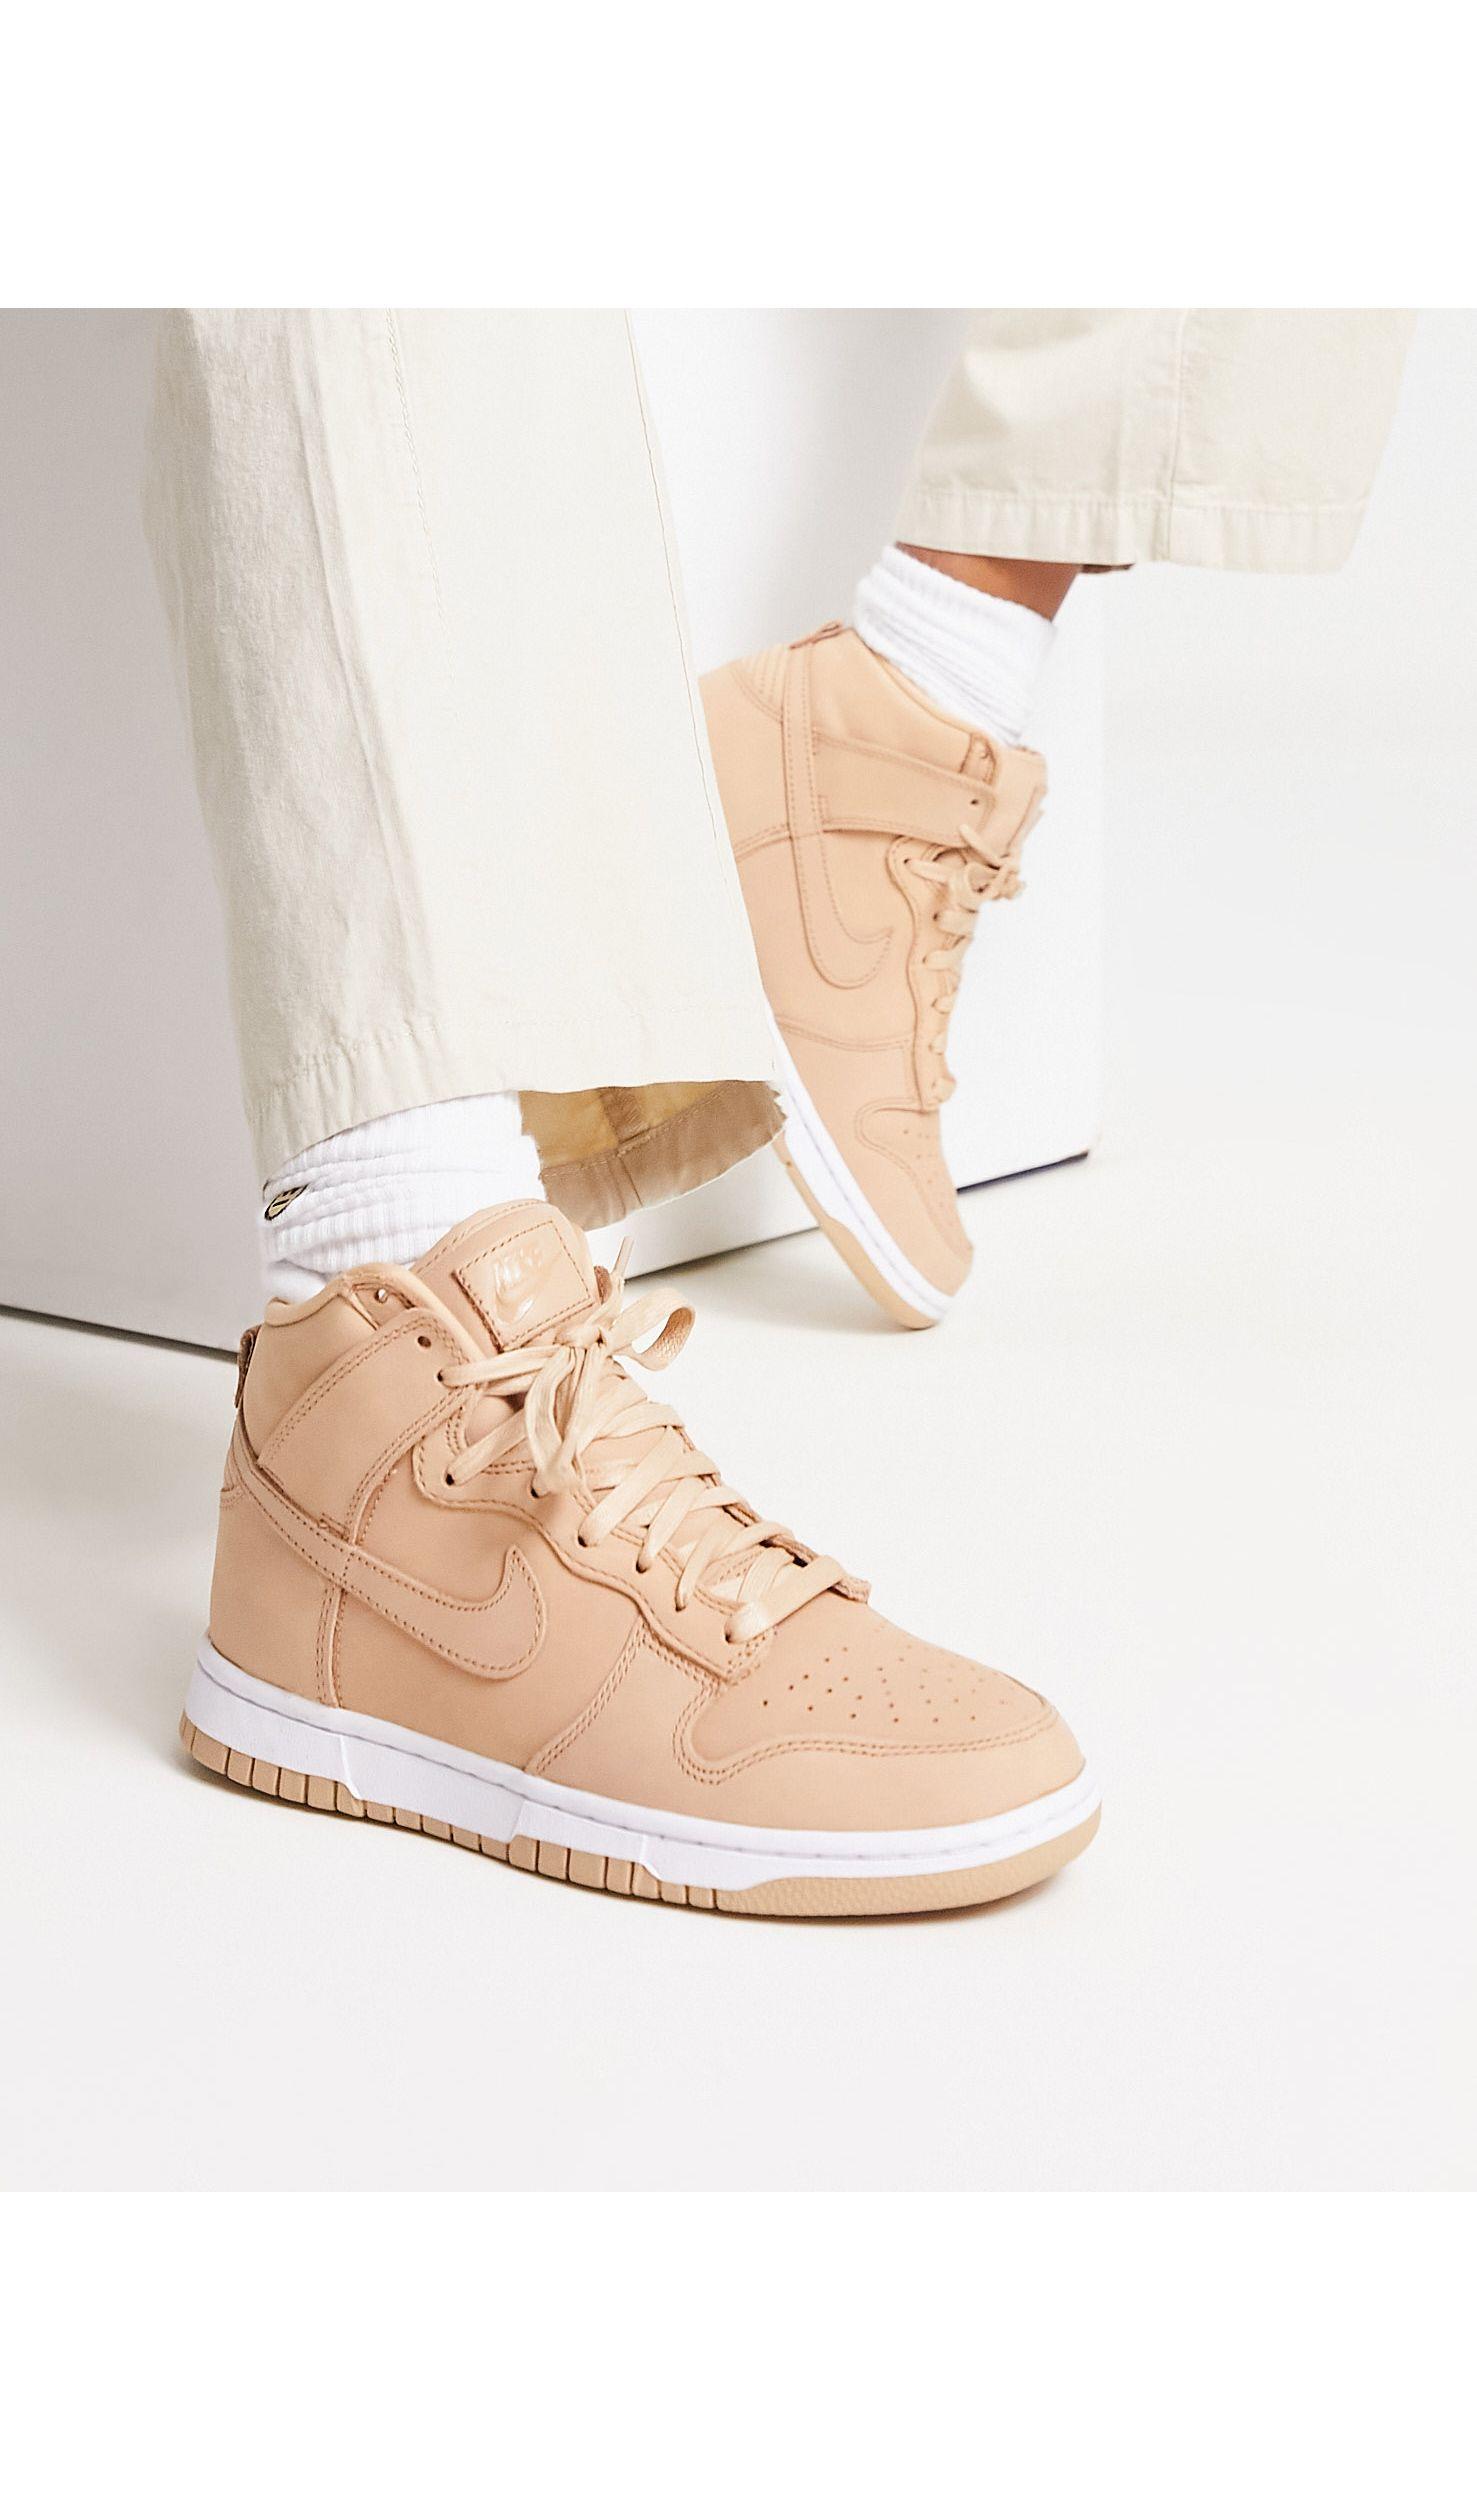 Nike Dunk High Top Trainers in White | Lyst